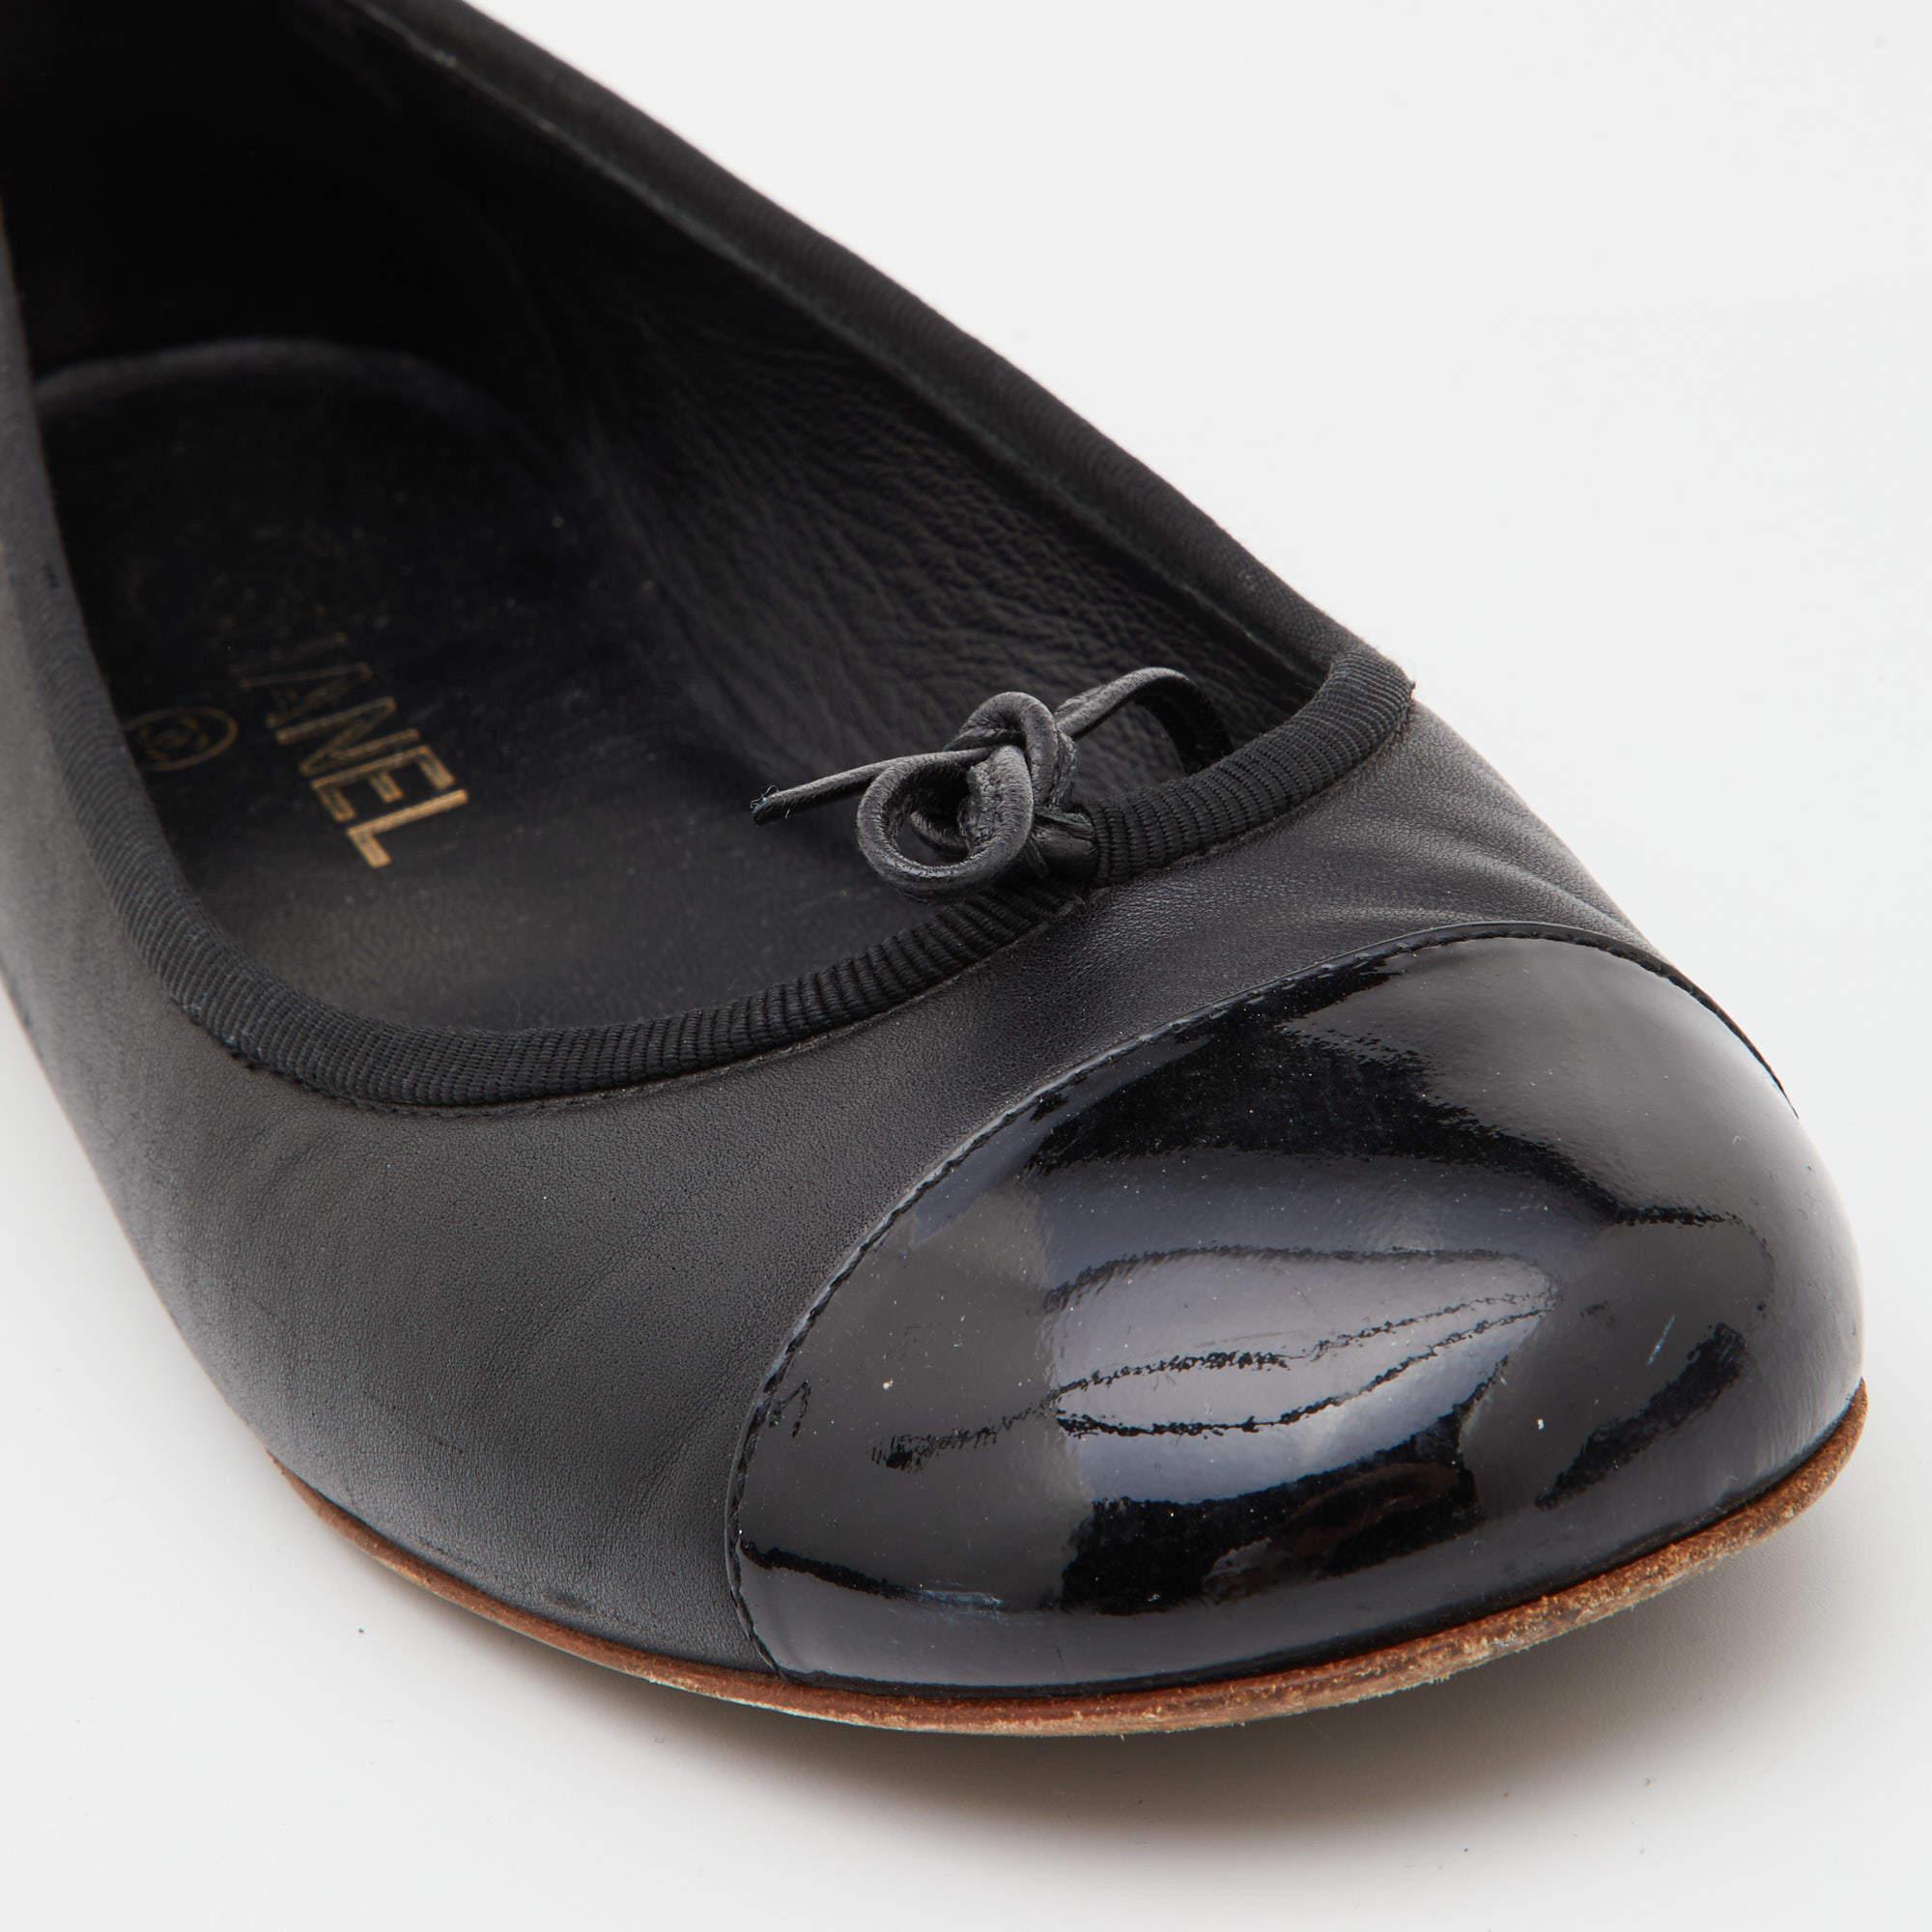 Chanel Black Leather and Patent Cap Toe Bow CC Ballet Flats Size 38 2